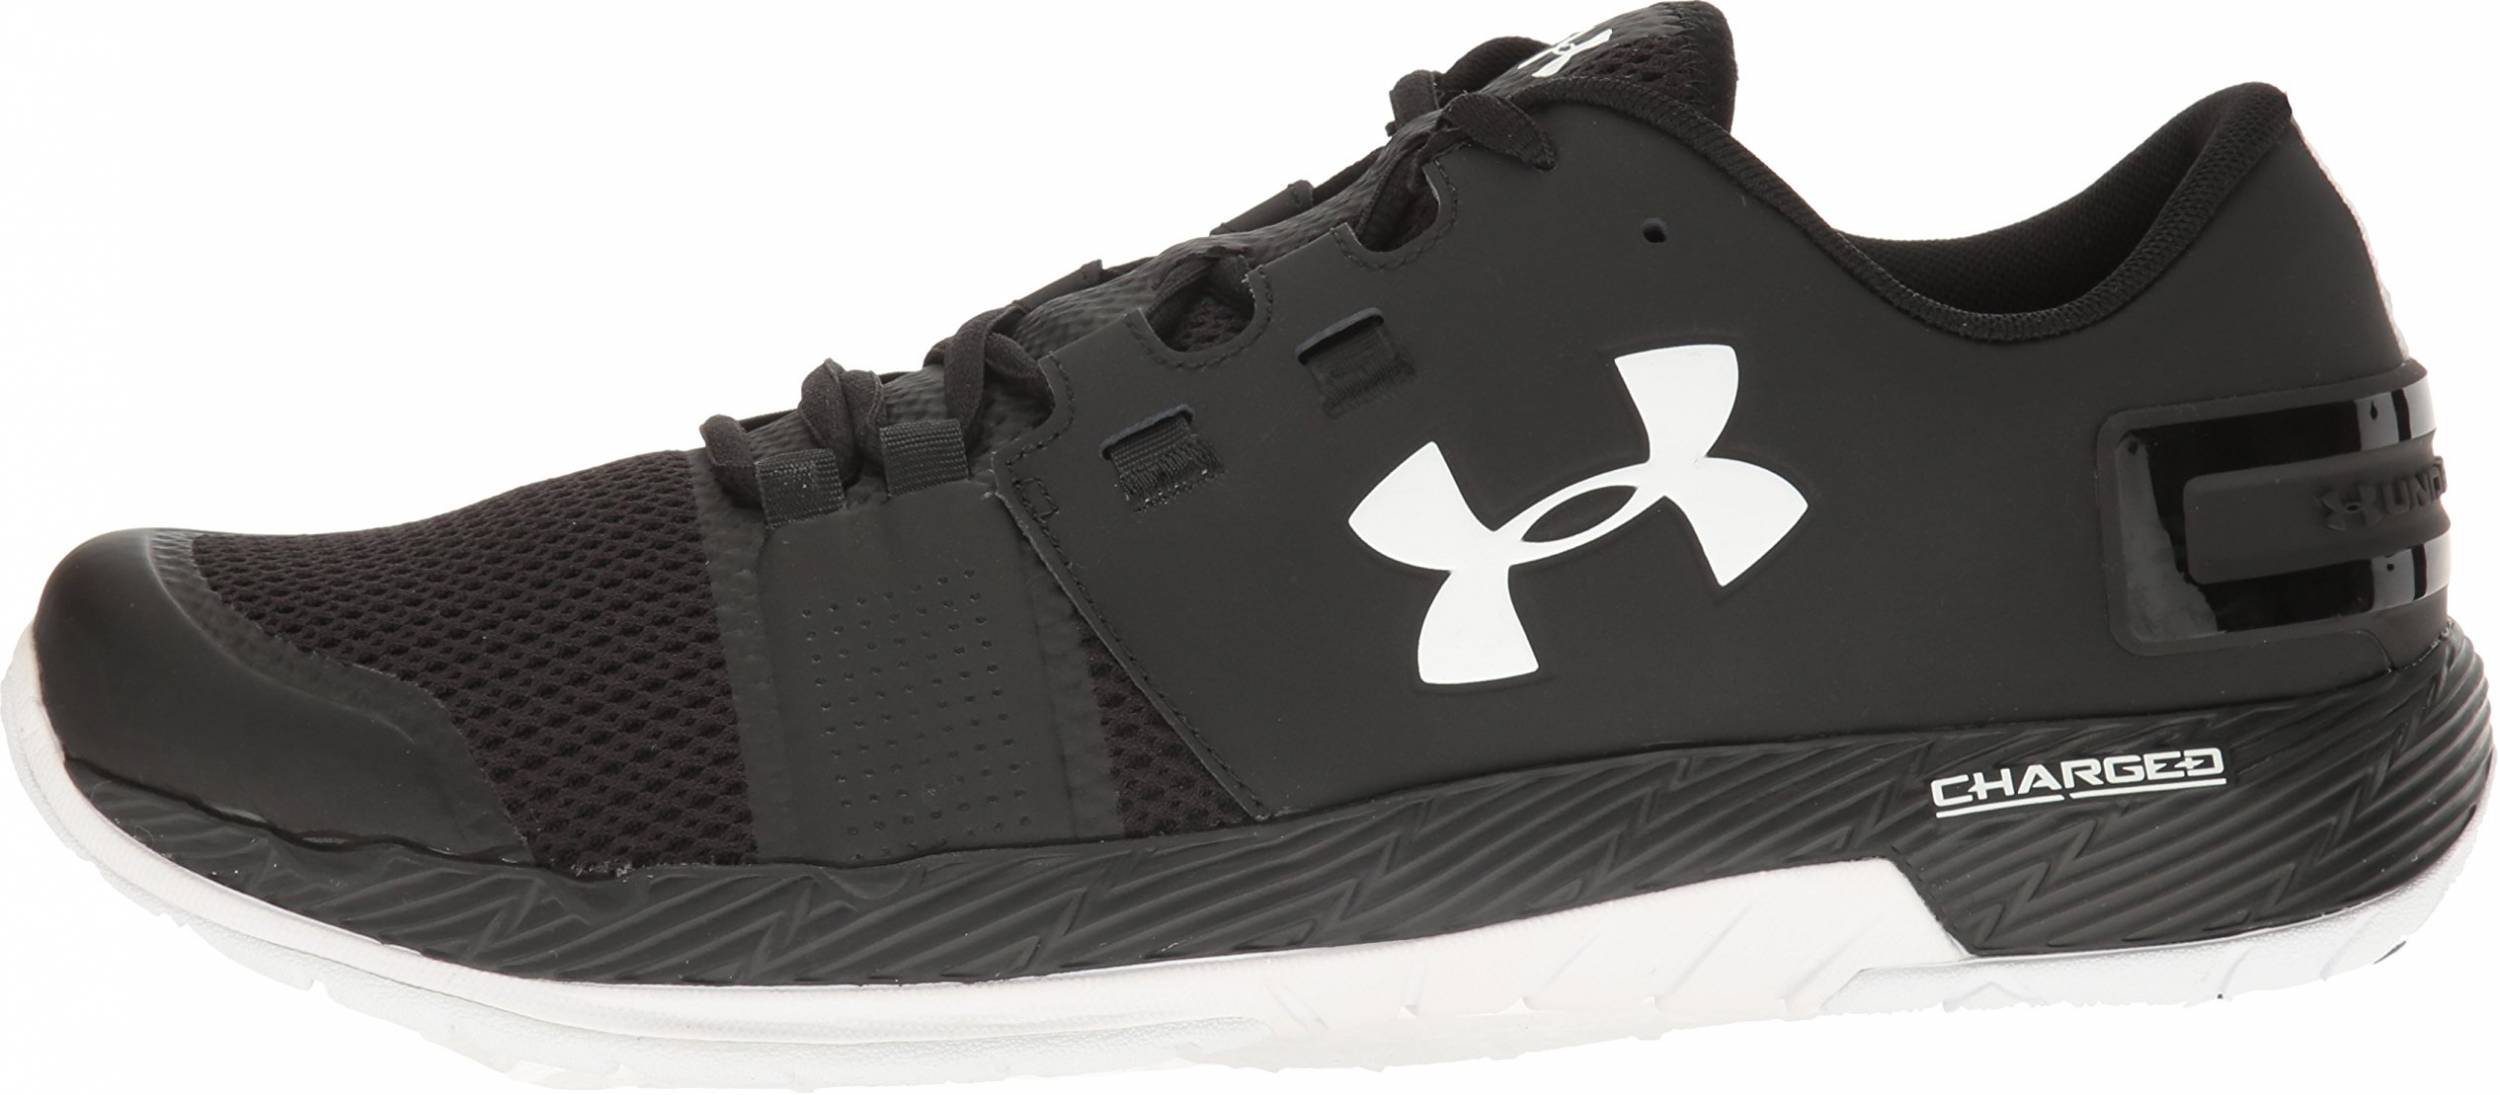 $100 + Review of Under Armour Commit 